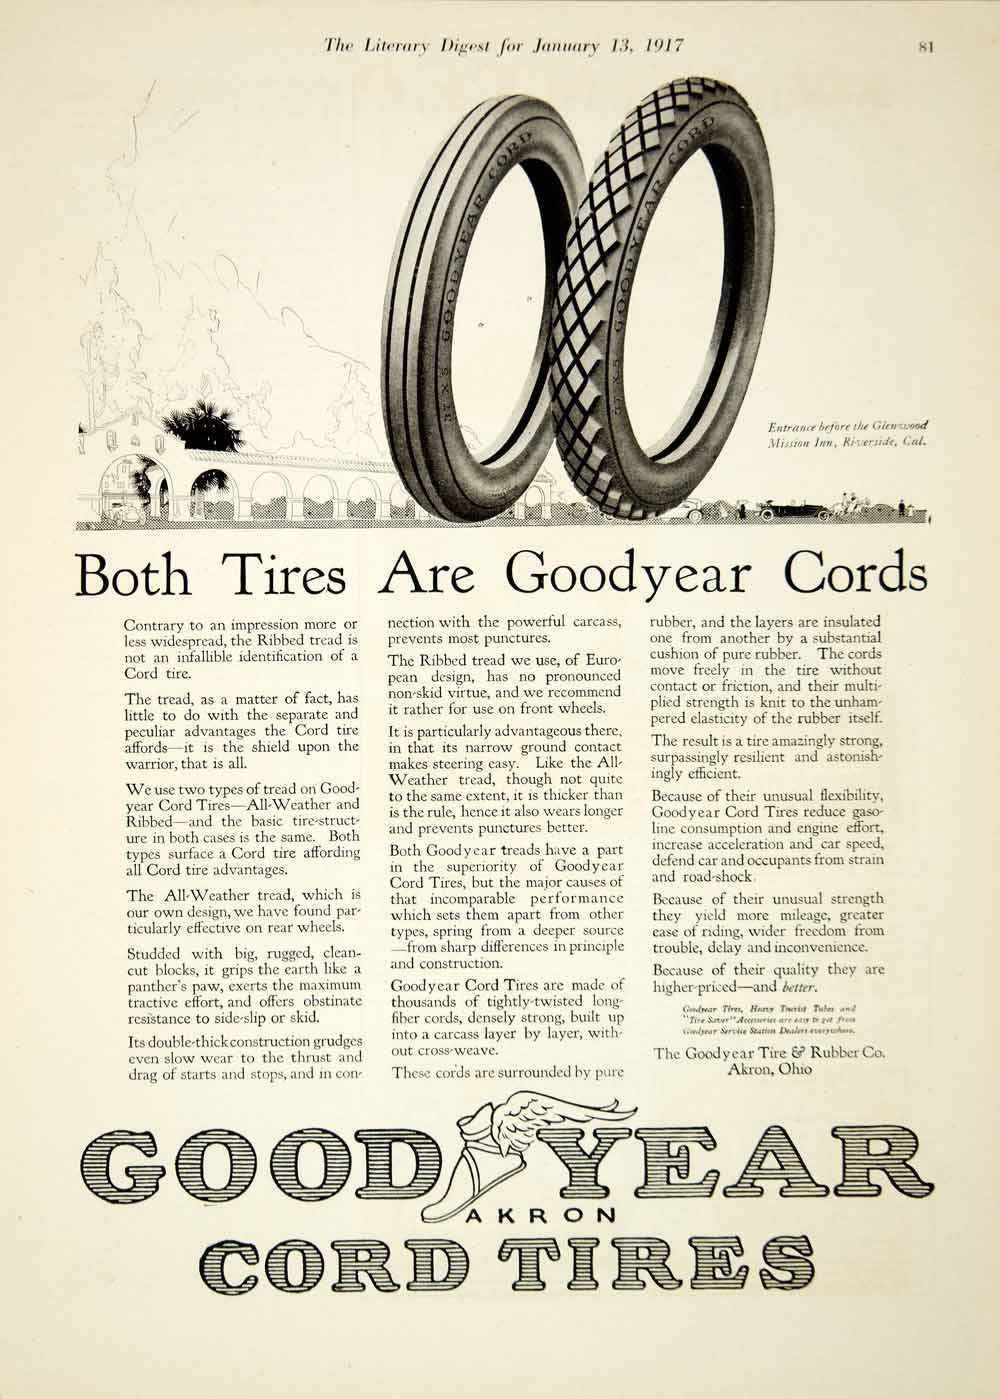 1917 Ad Good Year Cord Tires Glenwood Mission Inn Entrance Riverside YLD1 - Period Paper
